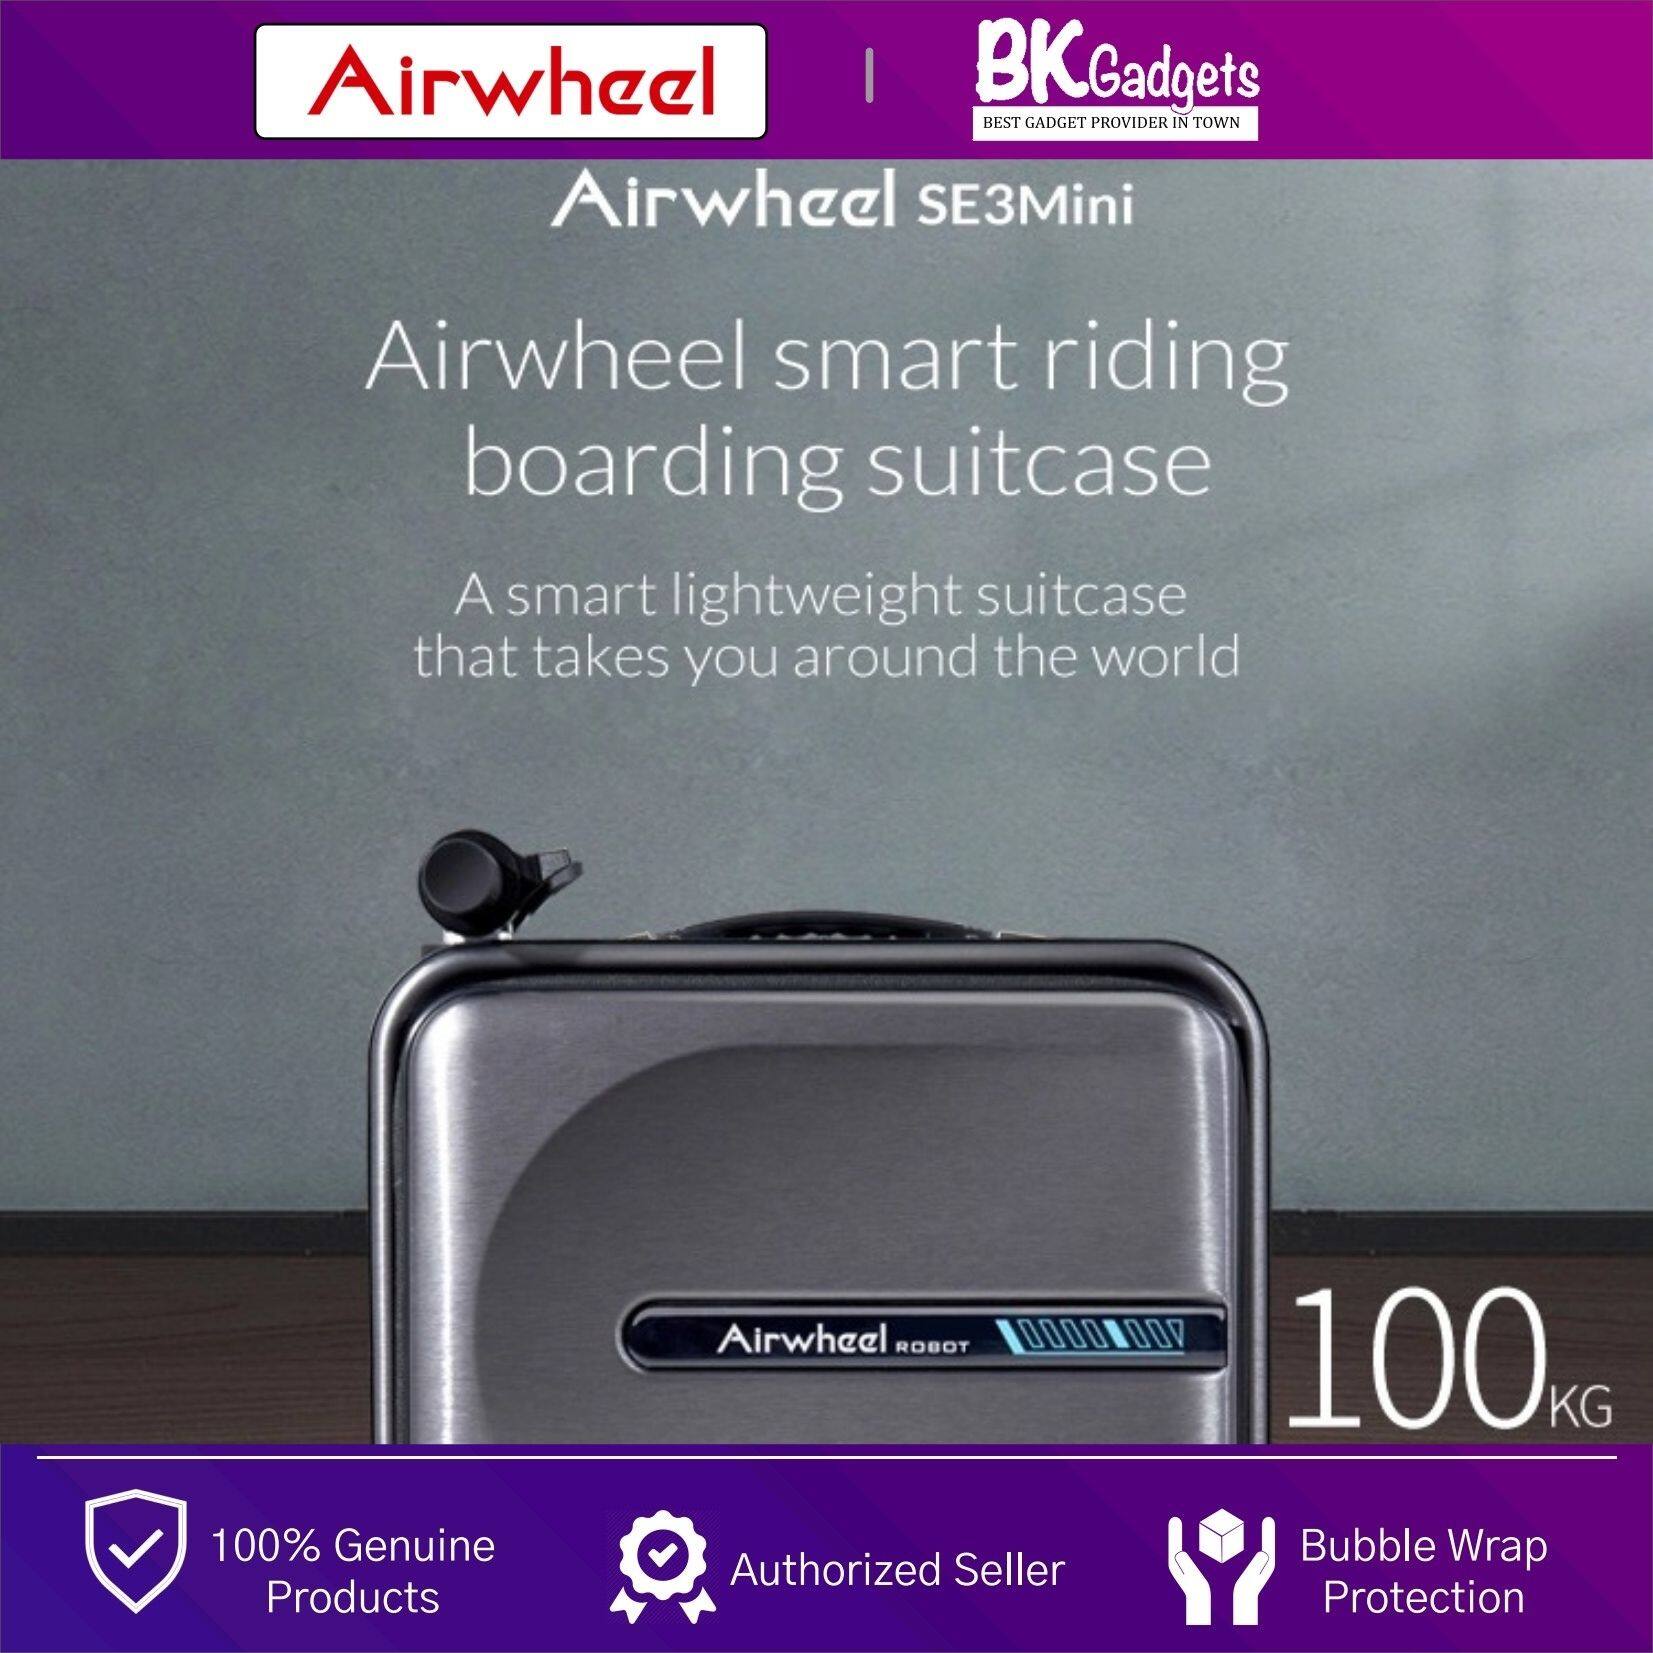 Airwheel SE3 Mini Smart Riding Suitcase 26L - Towing | Scooter Ride | Charging Ports | Cabin 20" Size | Smart Handle